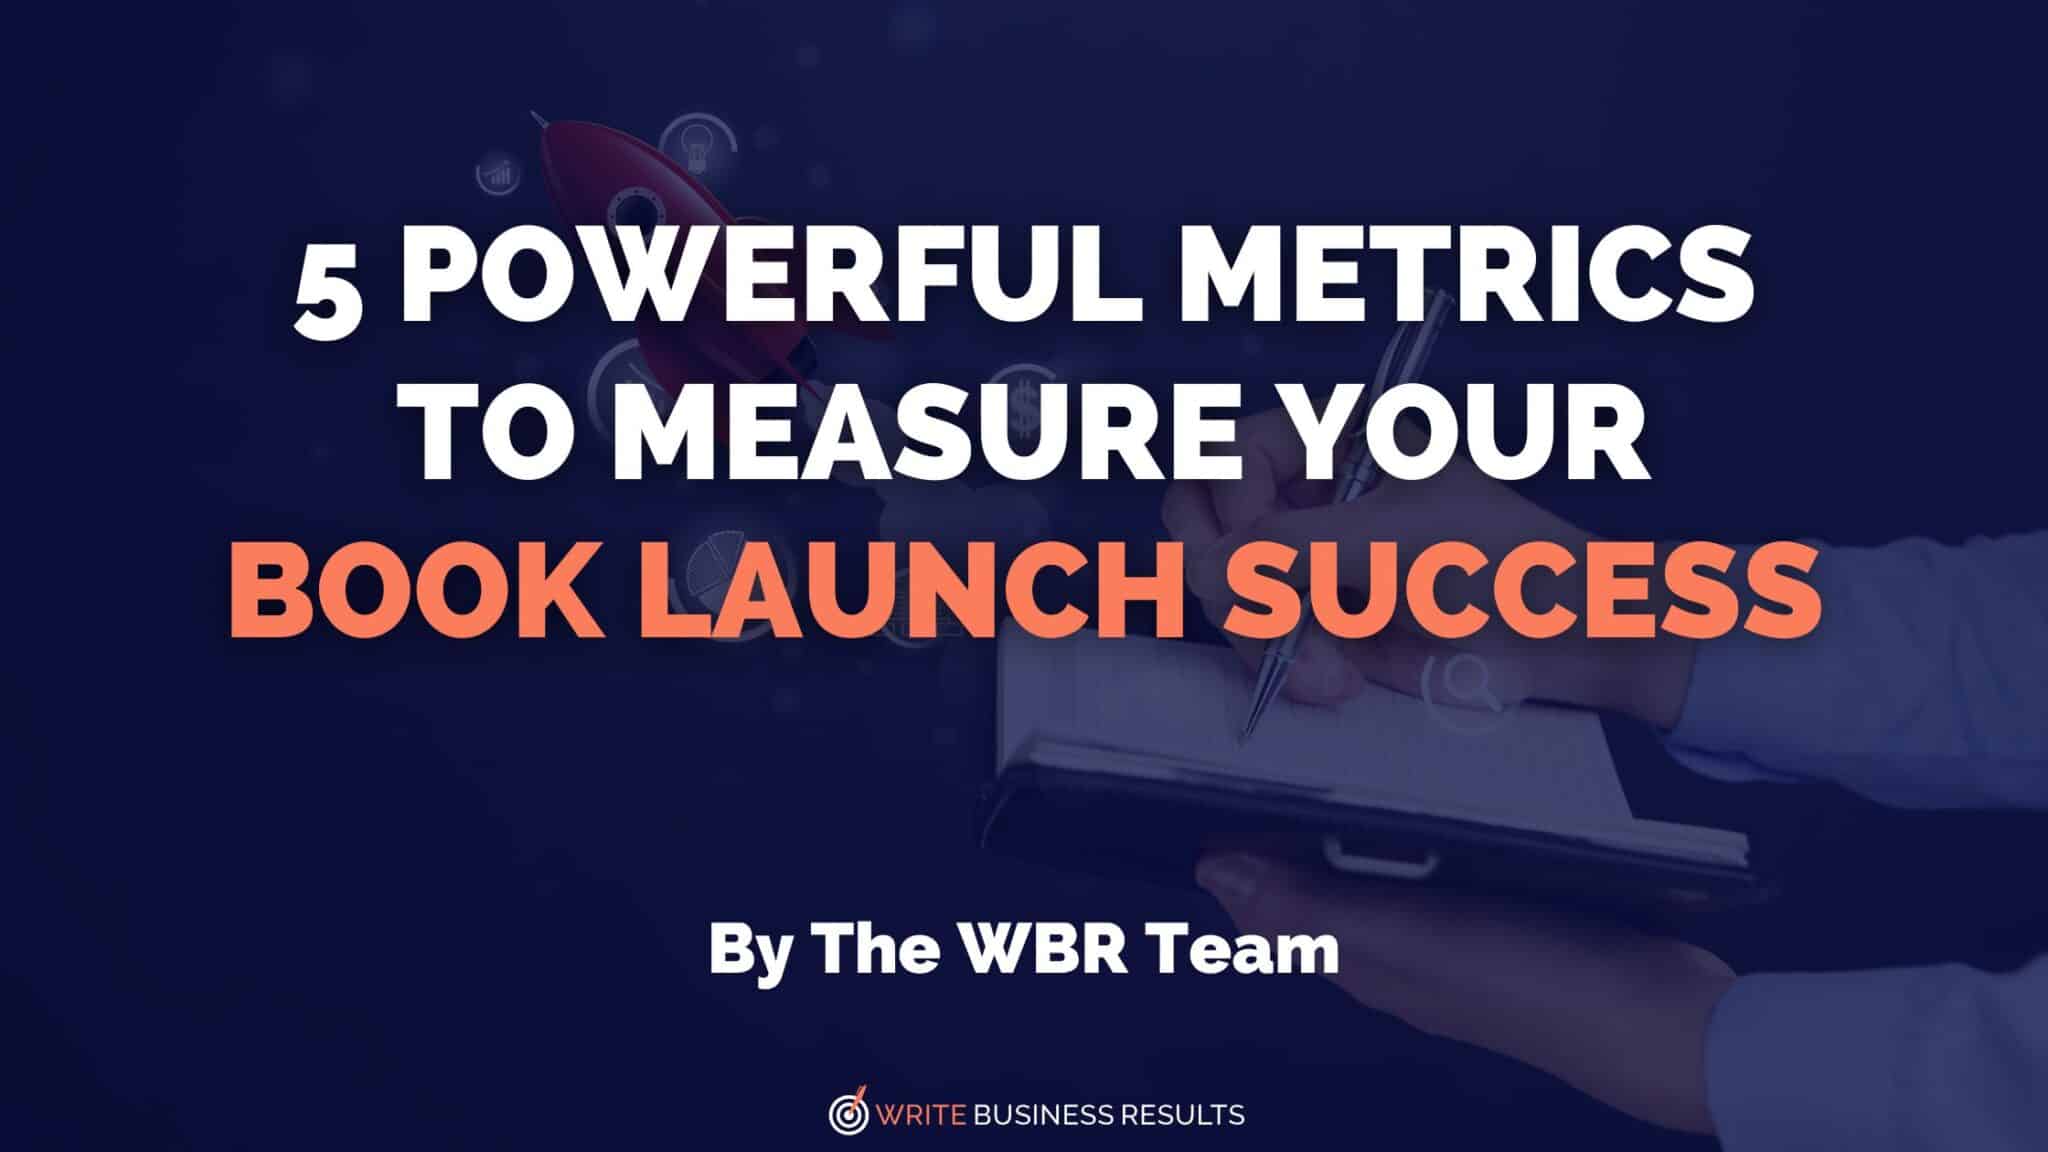 5 Powerful Metrics To Measure Your Book Launch Success